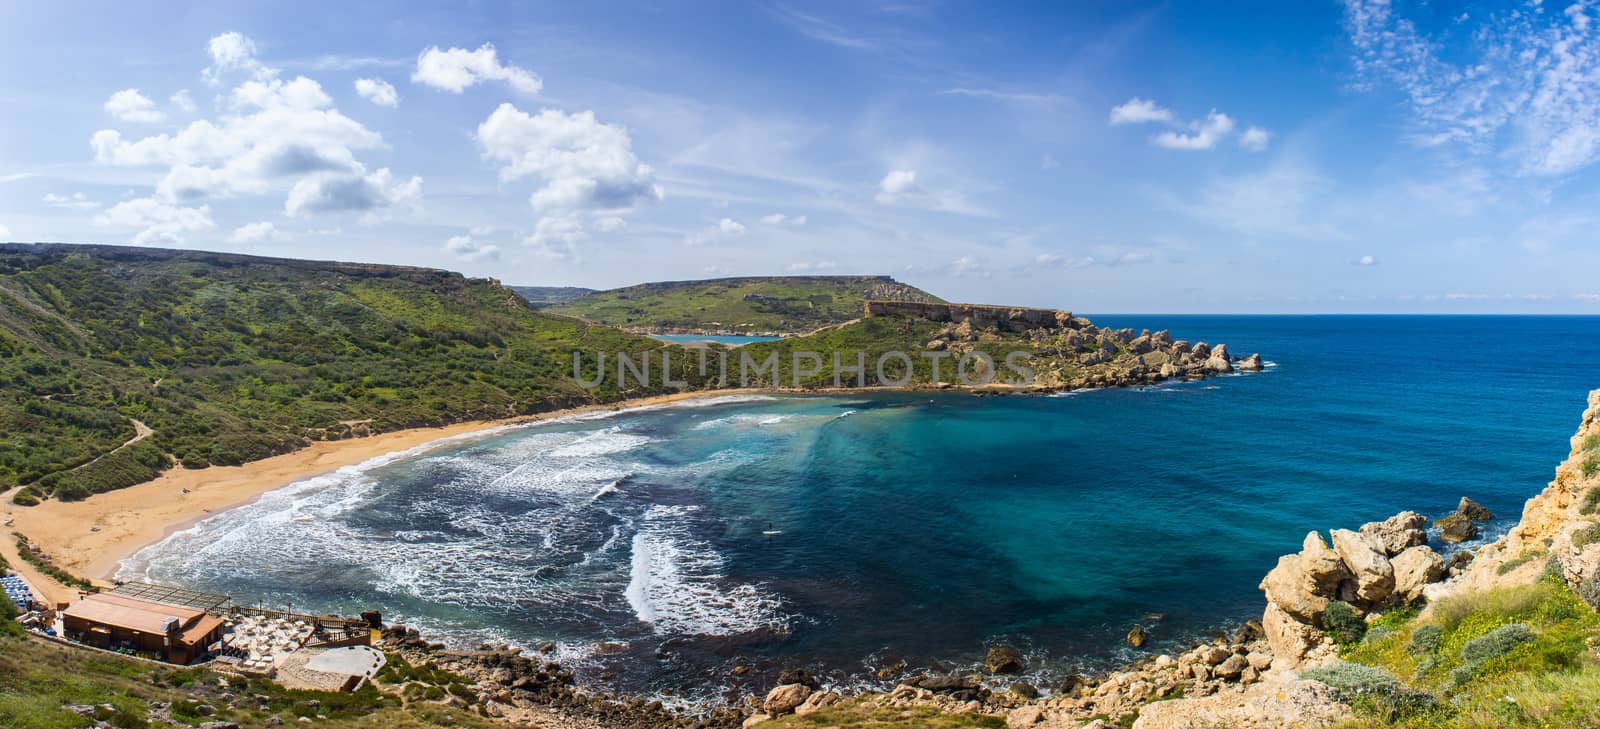 the rugged coastline of the island of Gozo are reflected in a blue sea